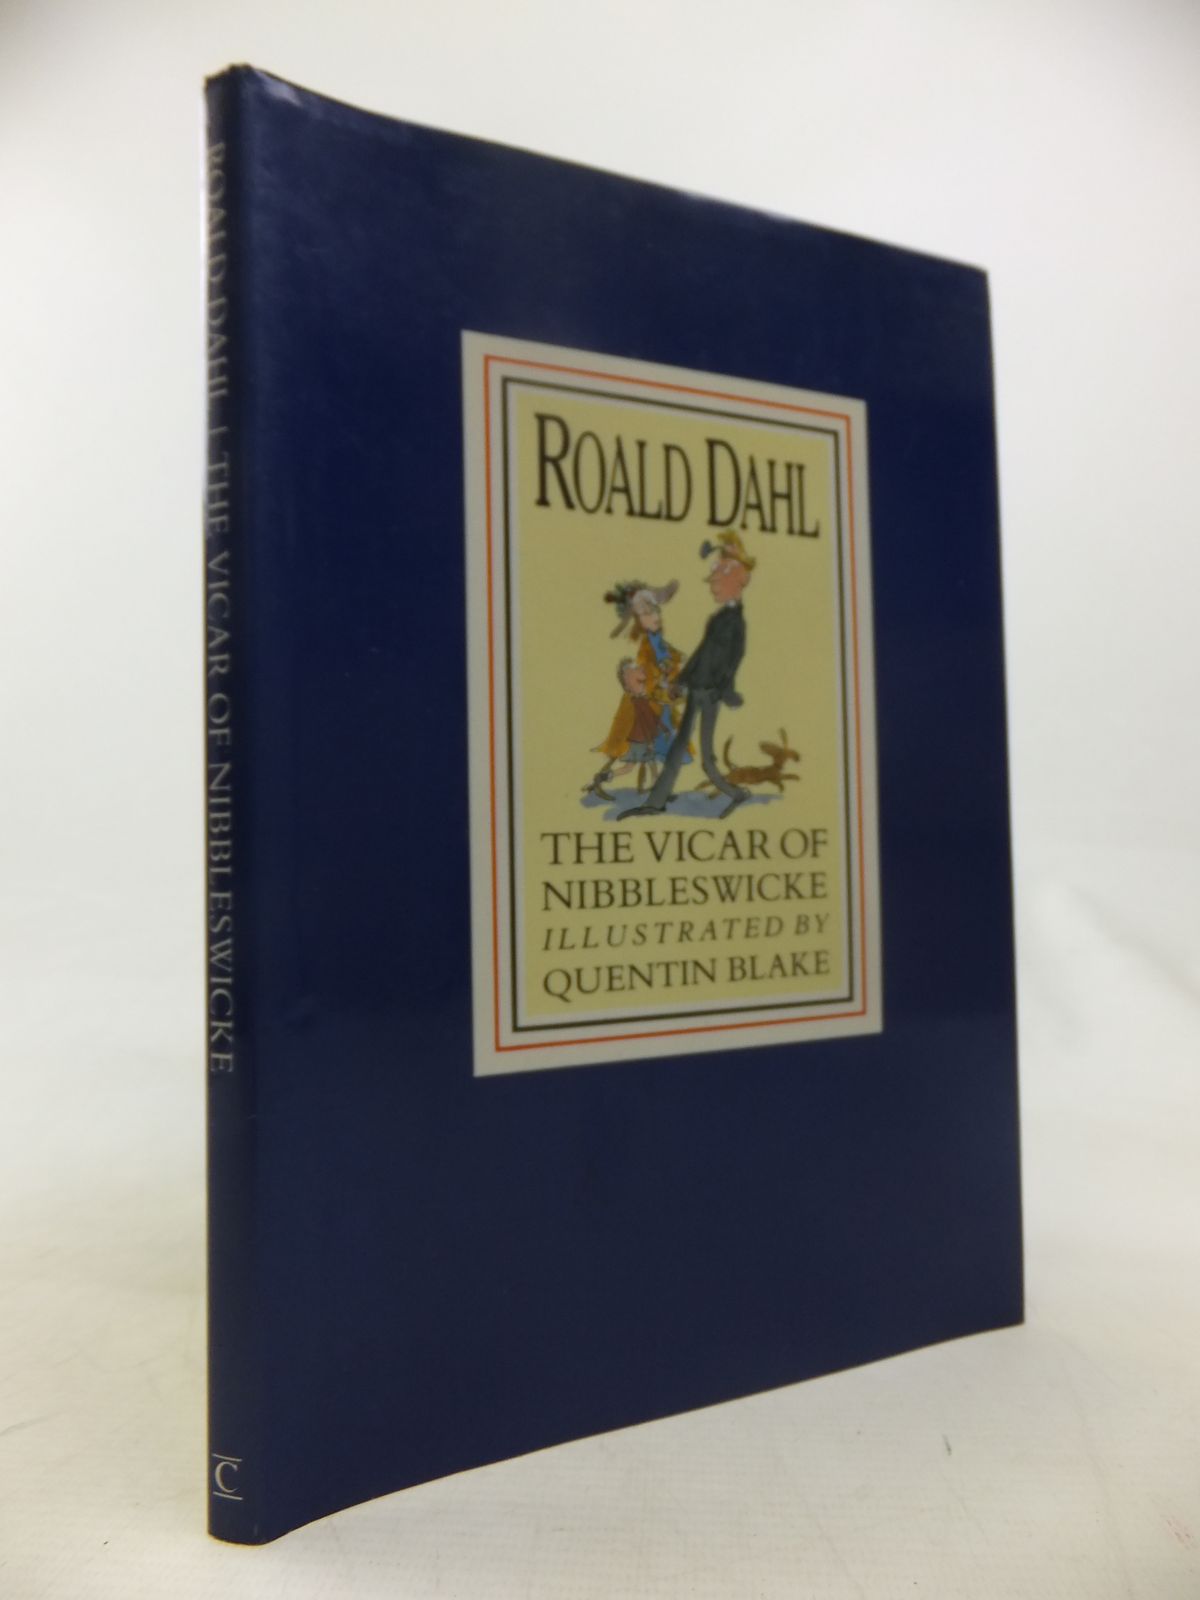 Cover of THE VICAR OF NIBBLESWICKE by Roald Dahl